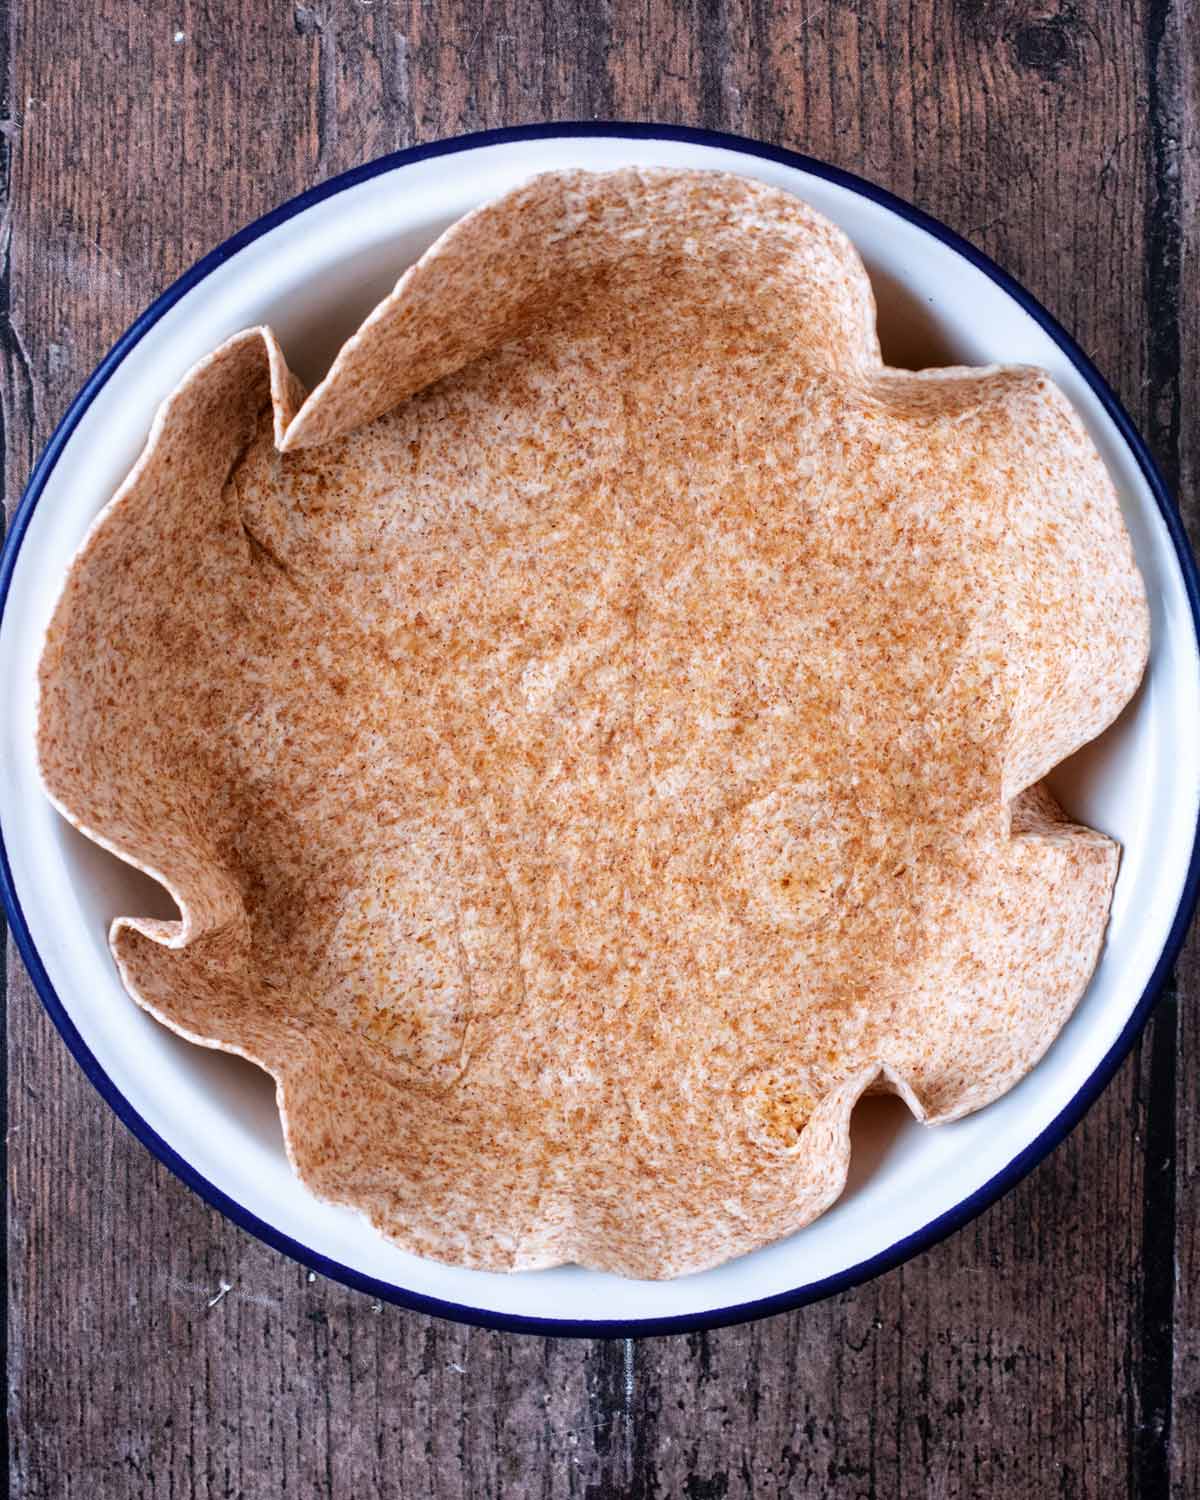 A wholewheat tortilla wrap pressed into a round baking dish.